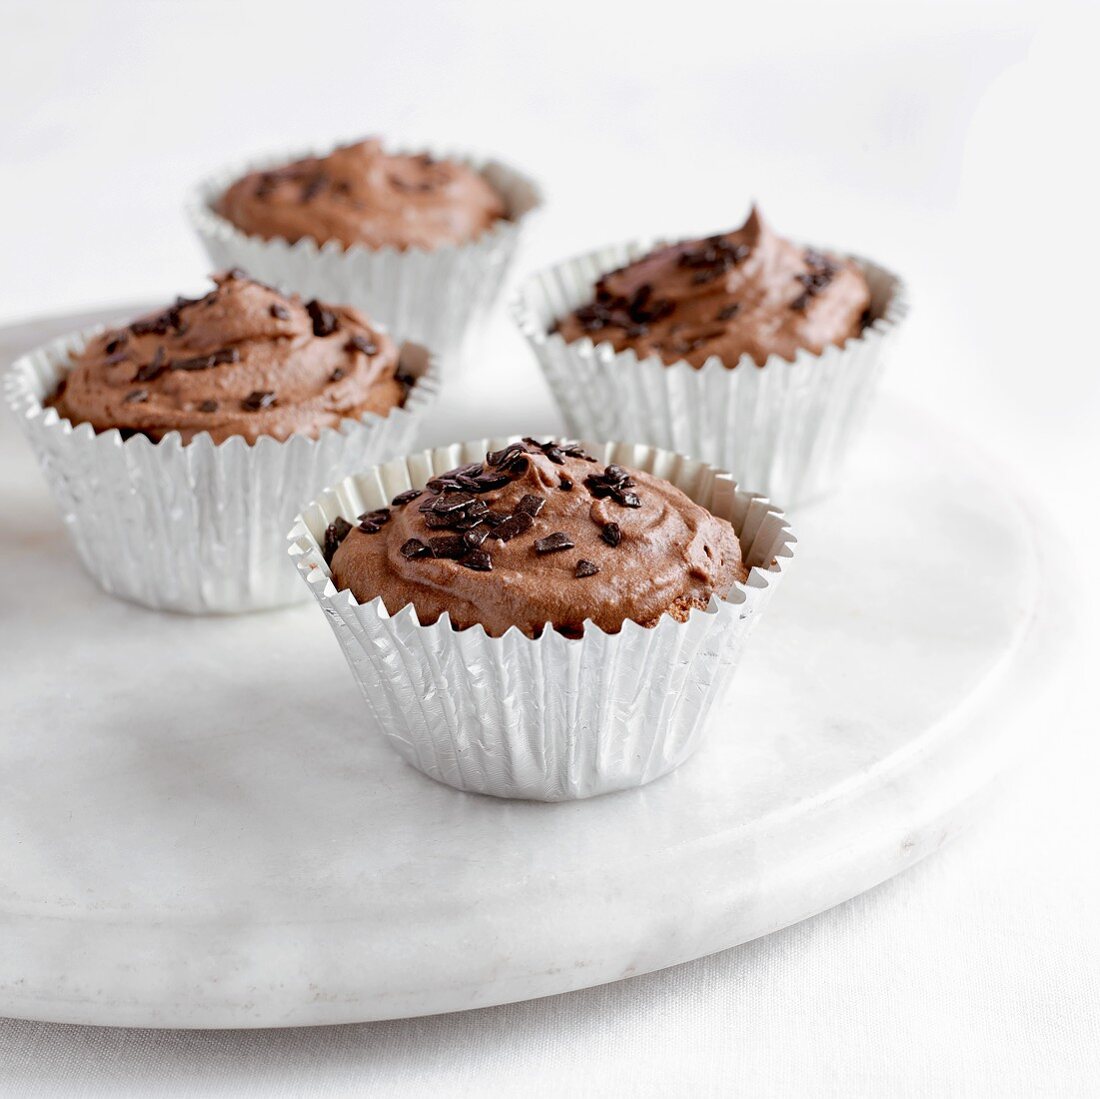 Four chocolate cupcakes on marble plate